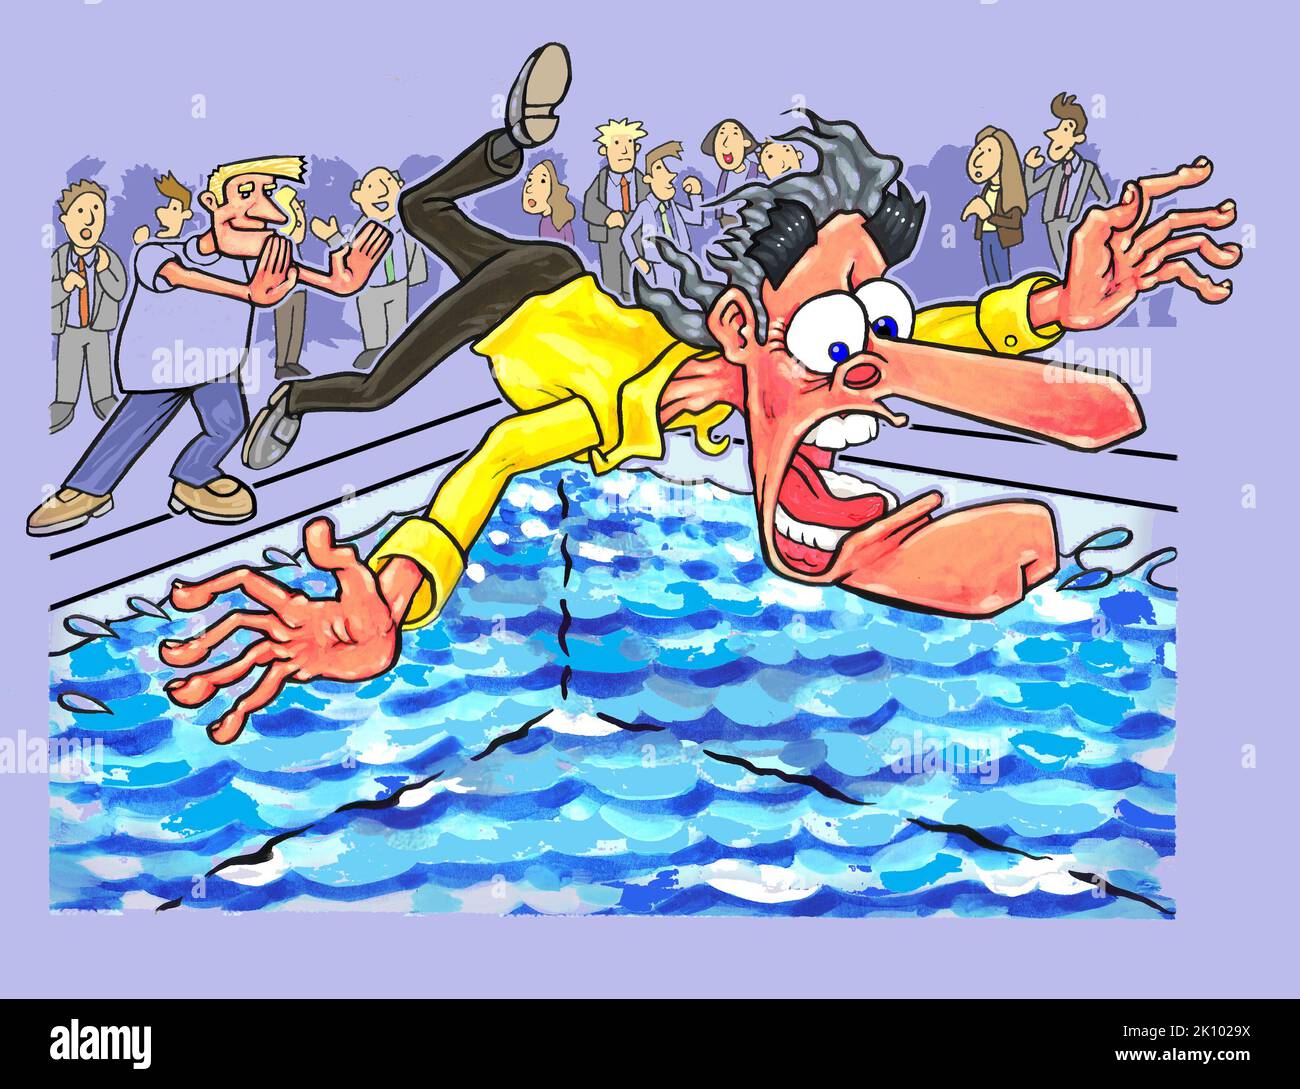 Artwork cartoon of man being pushed into swimming pool. Illustrating practical jokes, fear of water, April fool's, figure of speech (in the deep end). Stock Photo